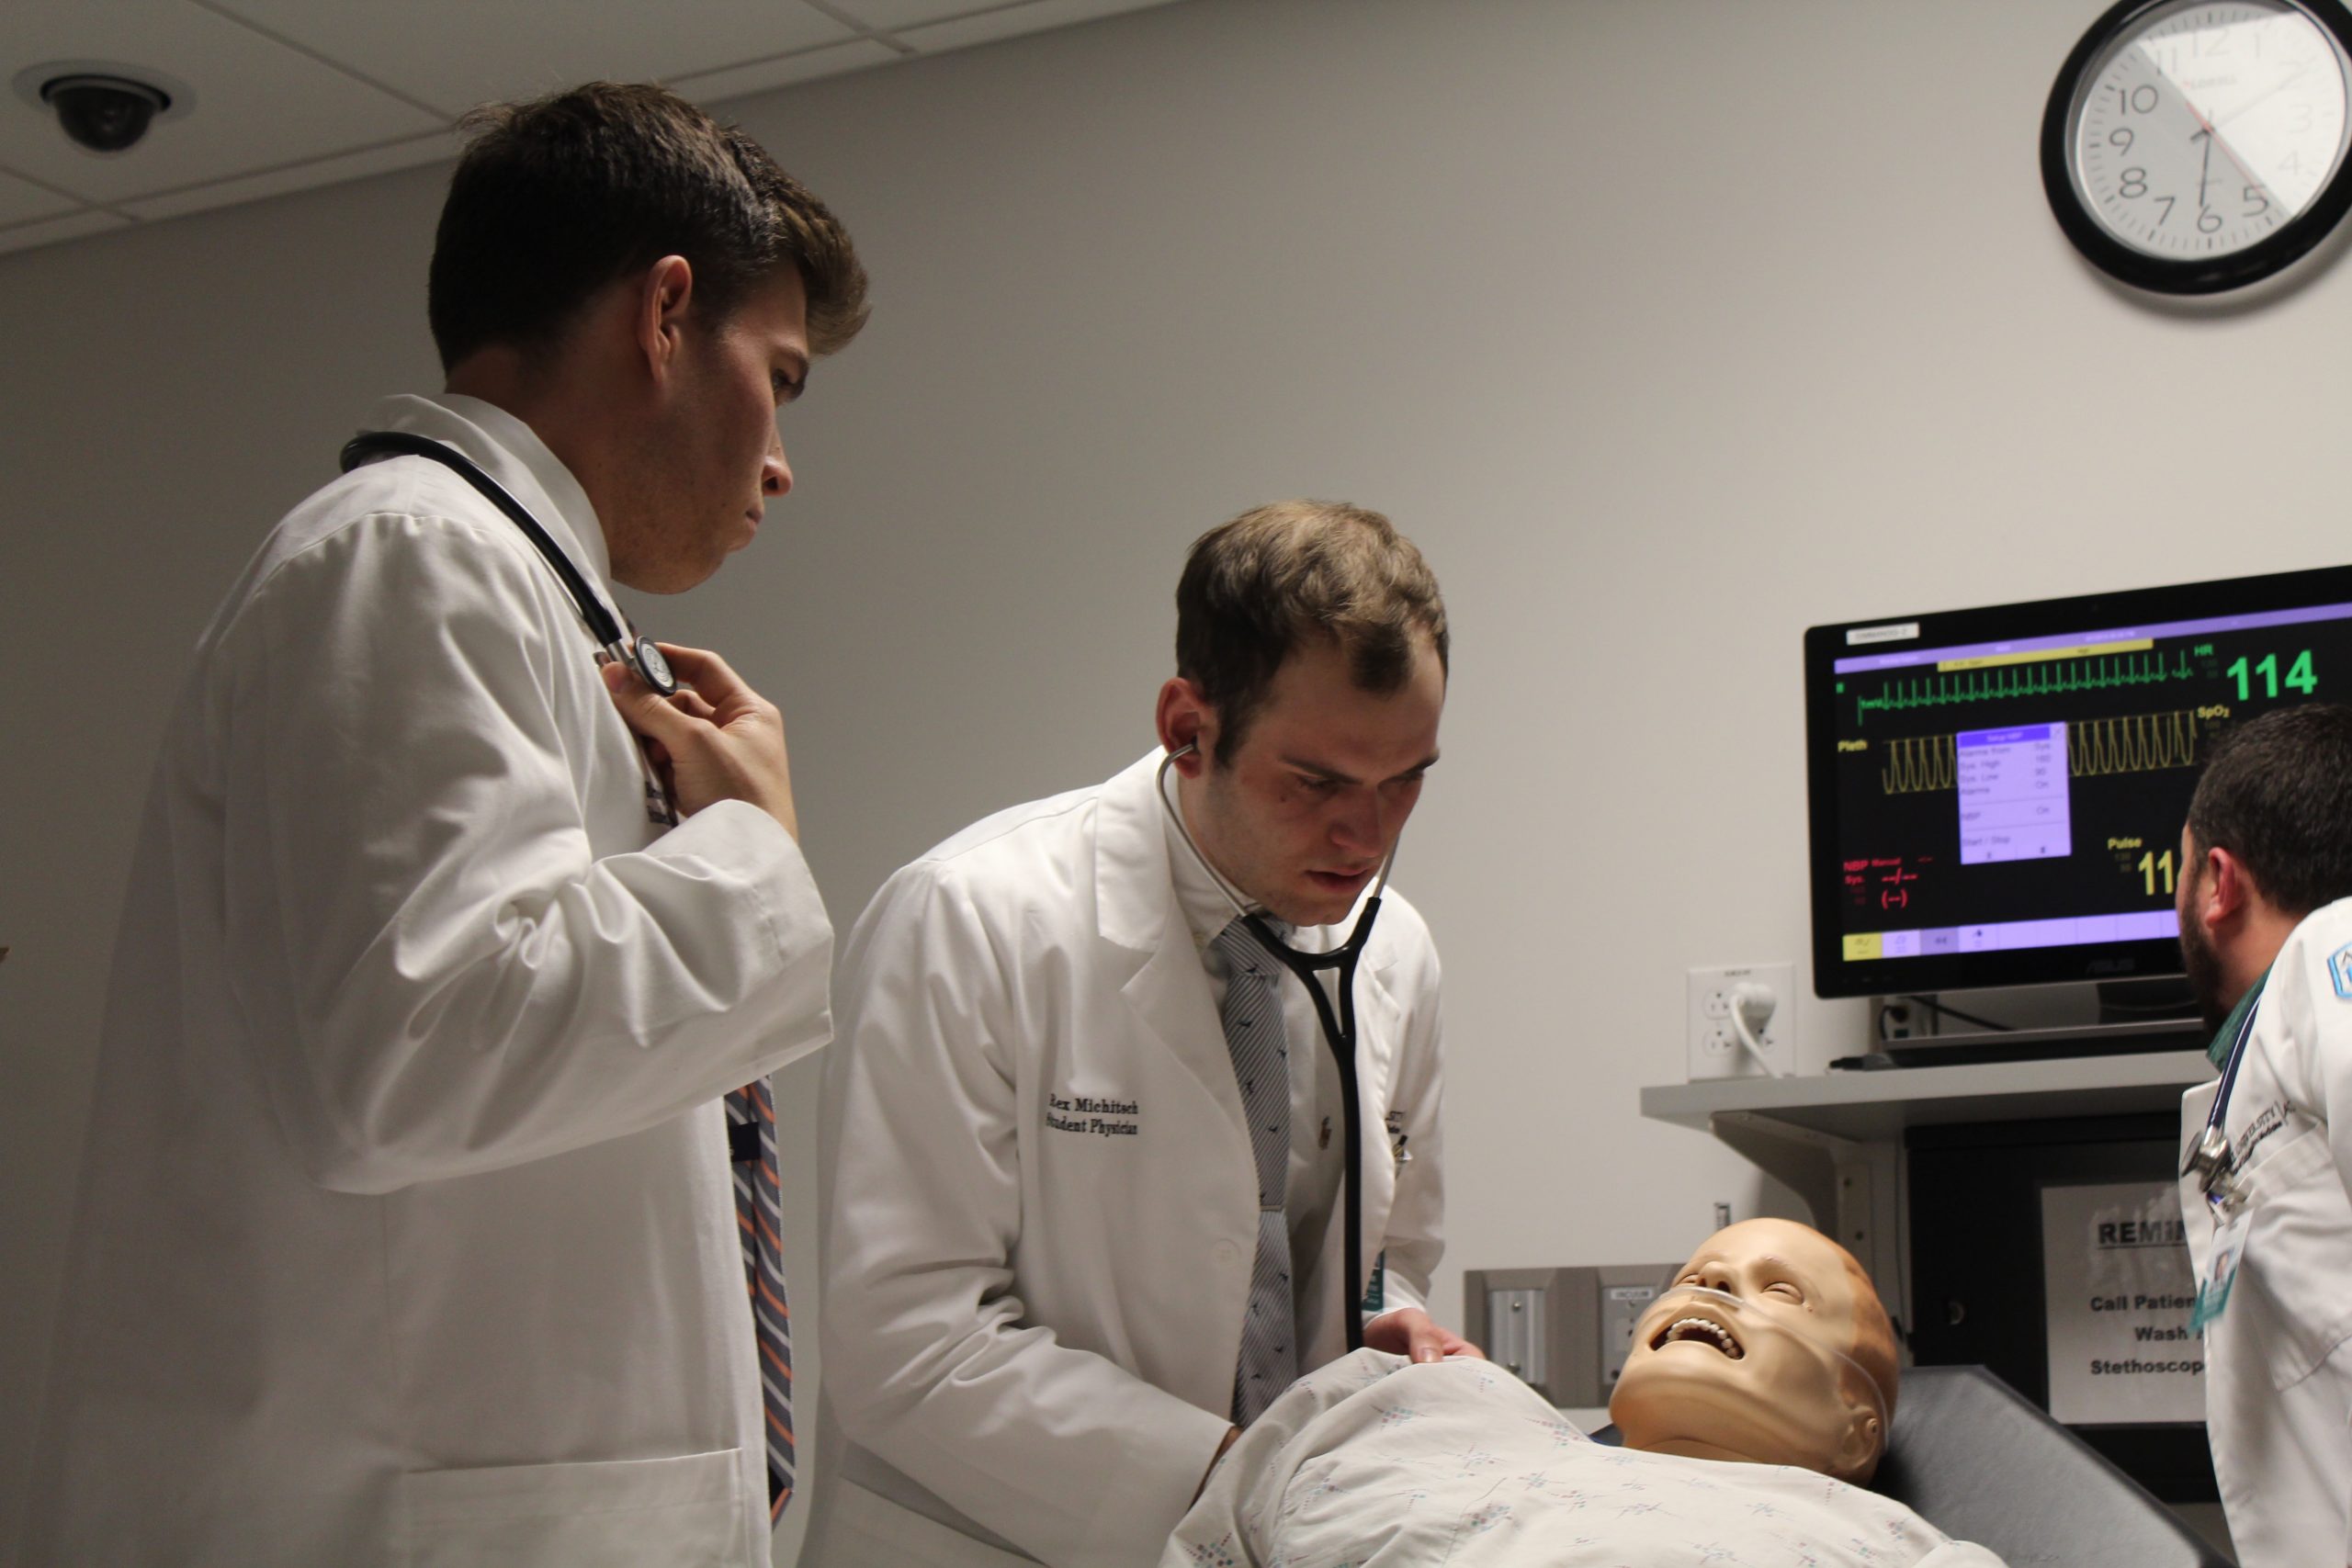 Students working with human patient simulator